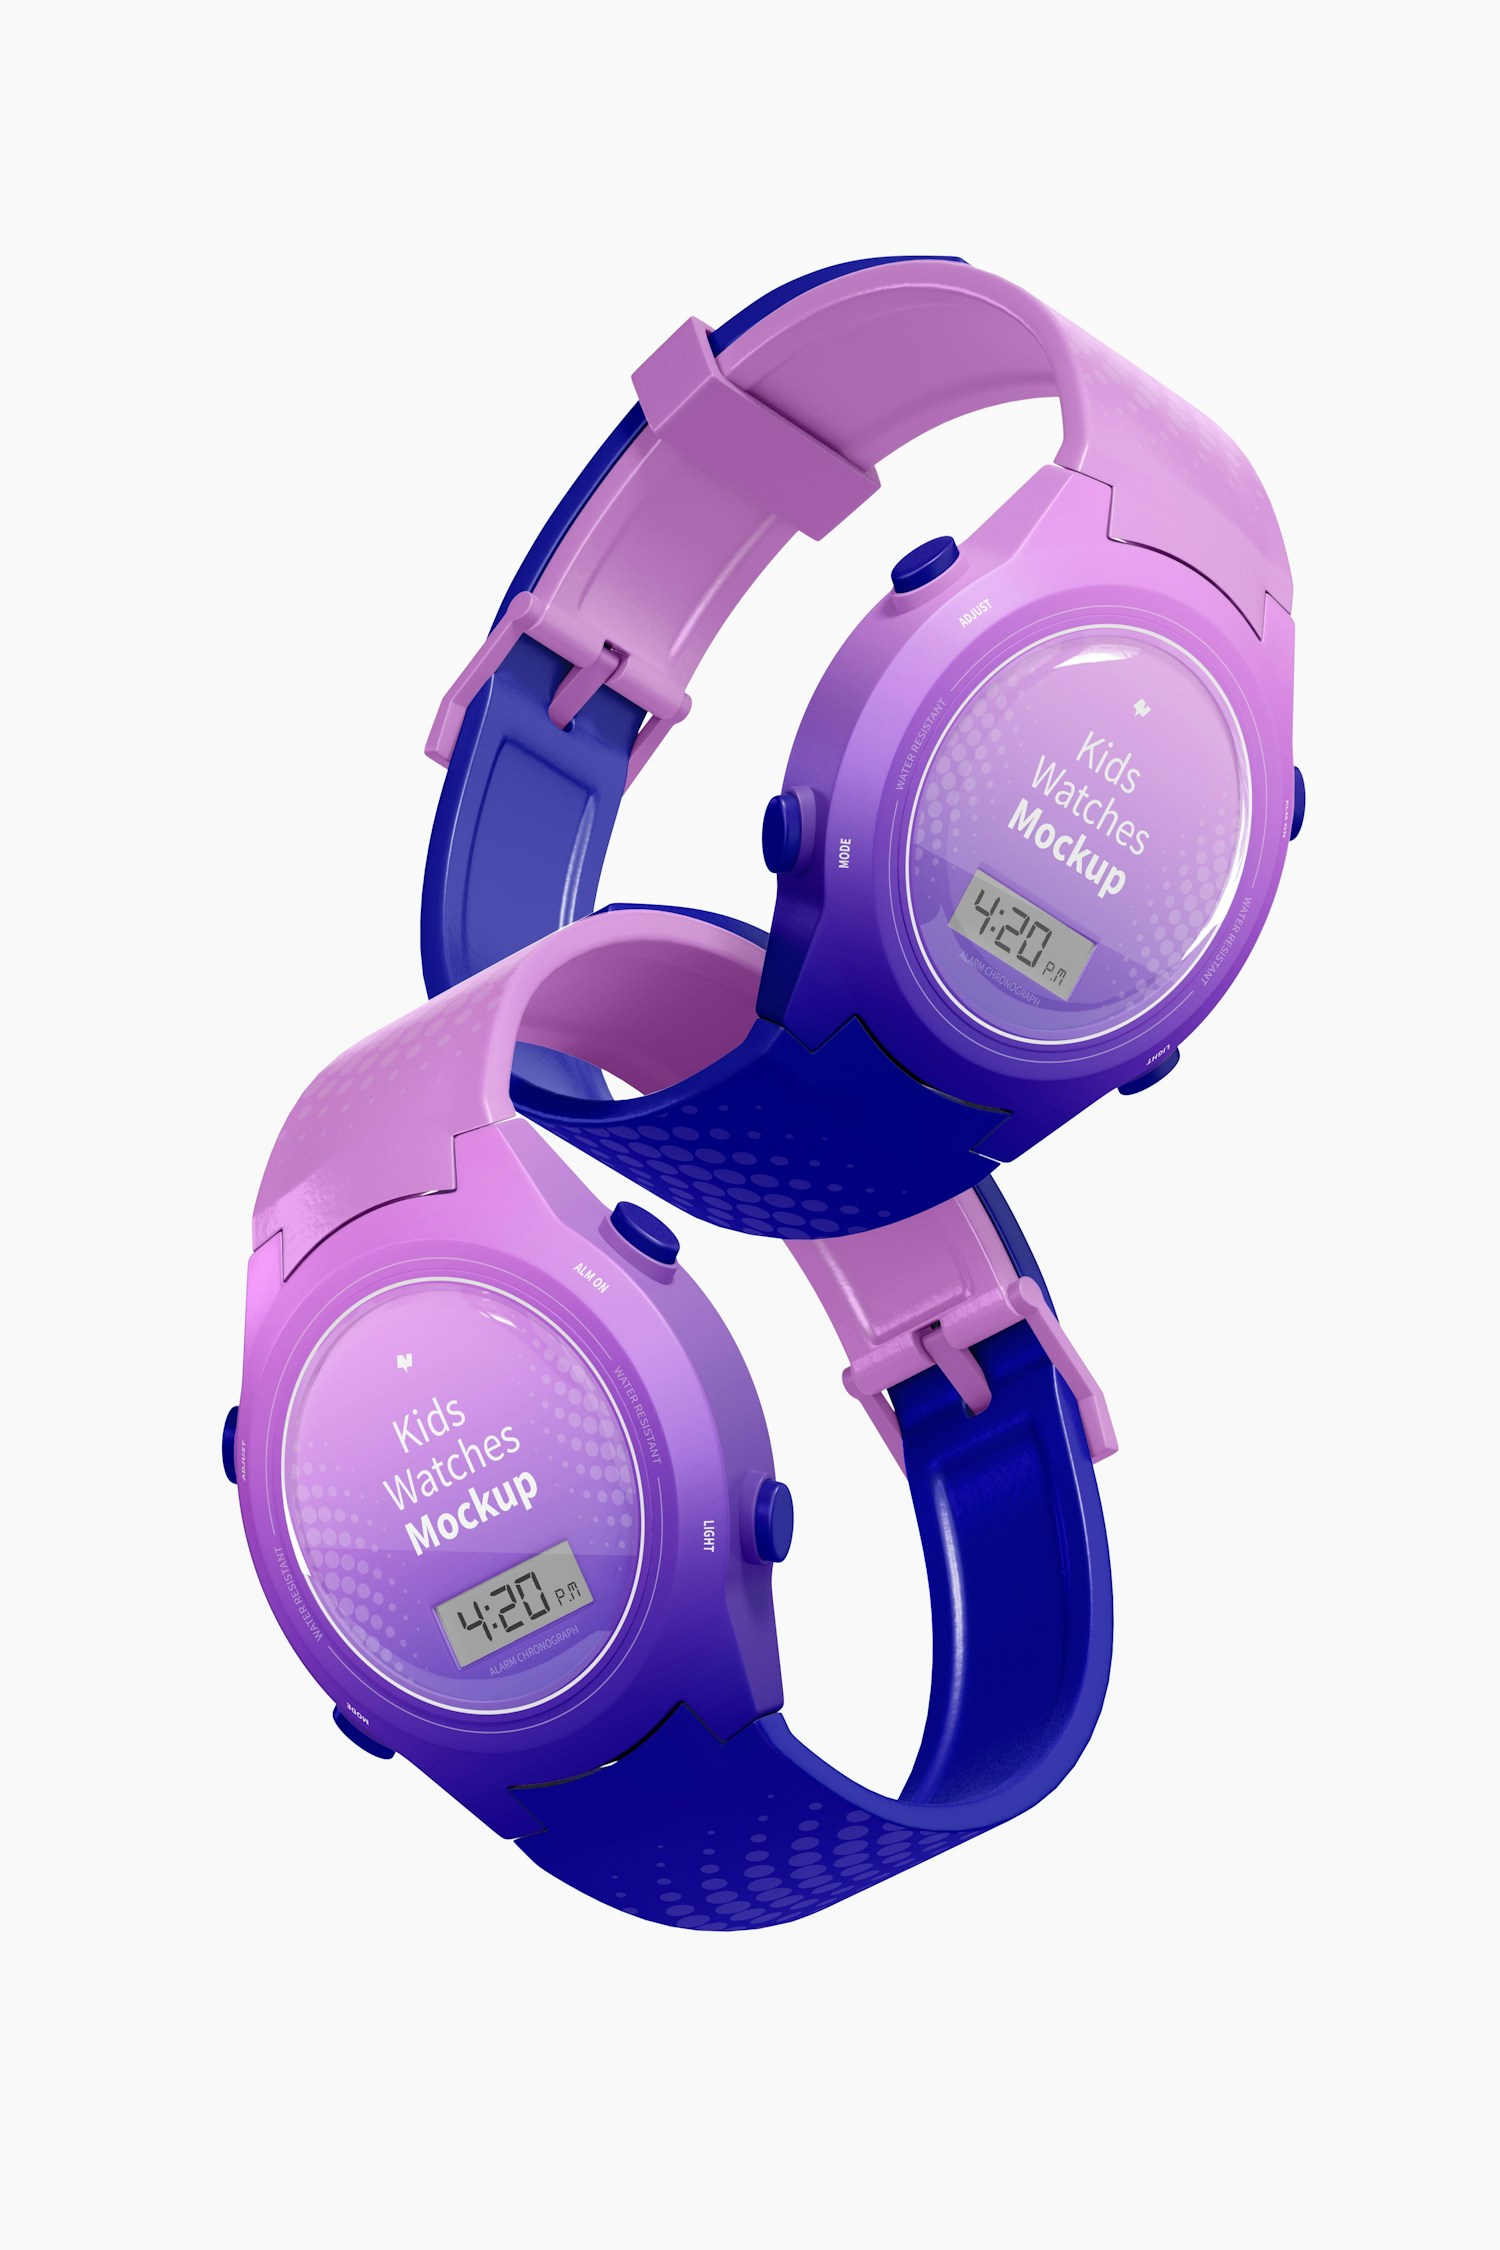 Kids Watches Mockup, Floating